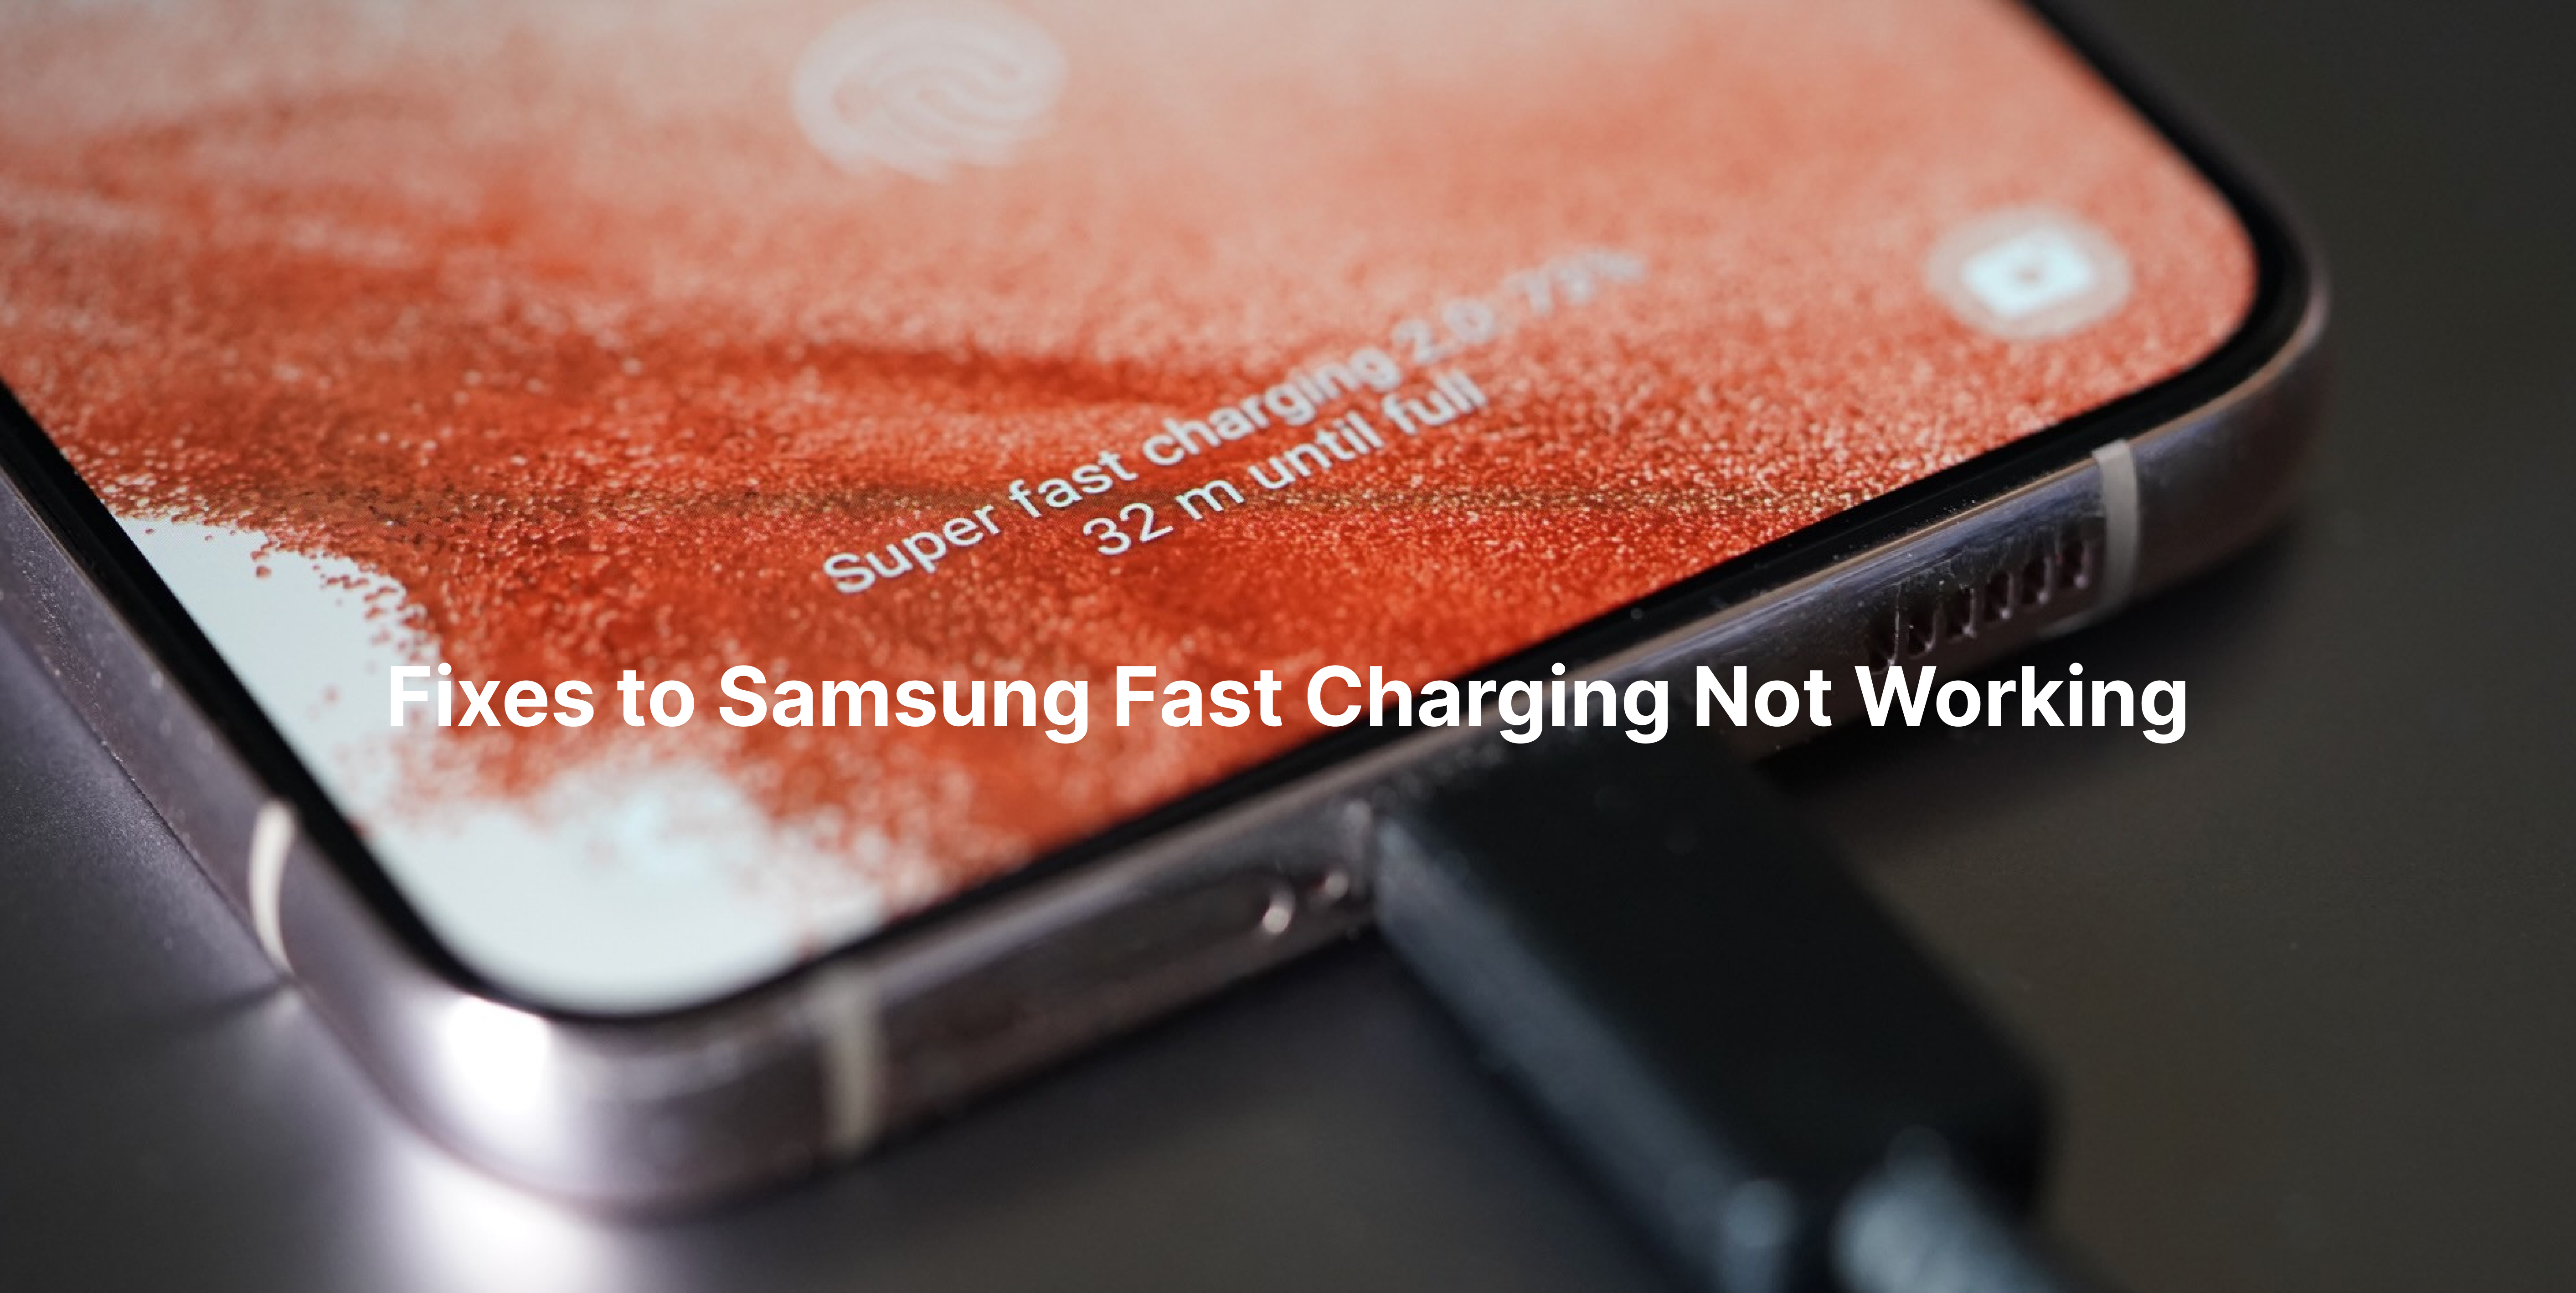 [Guide] How to Fix Samsung Fast Charging Not Working